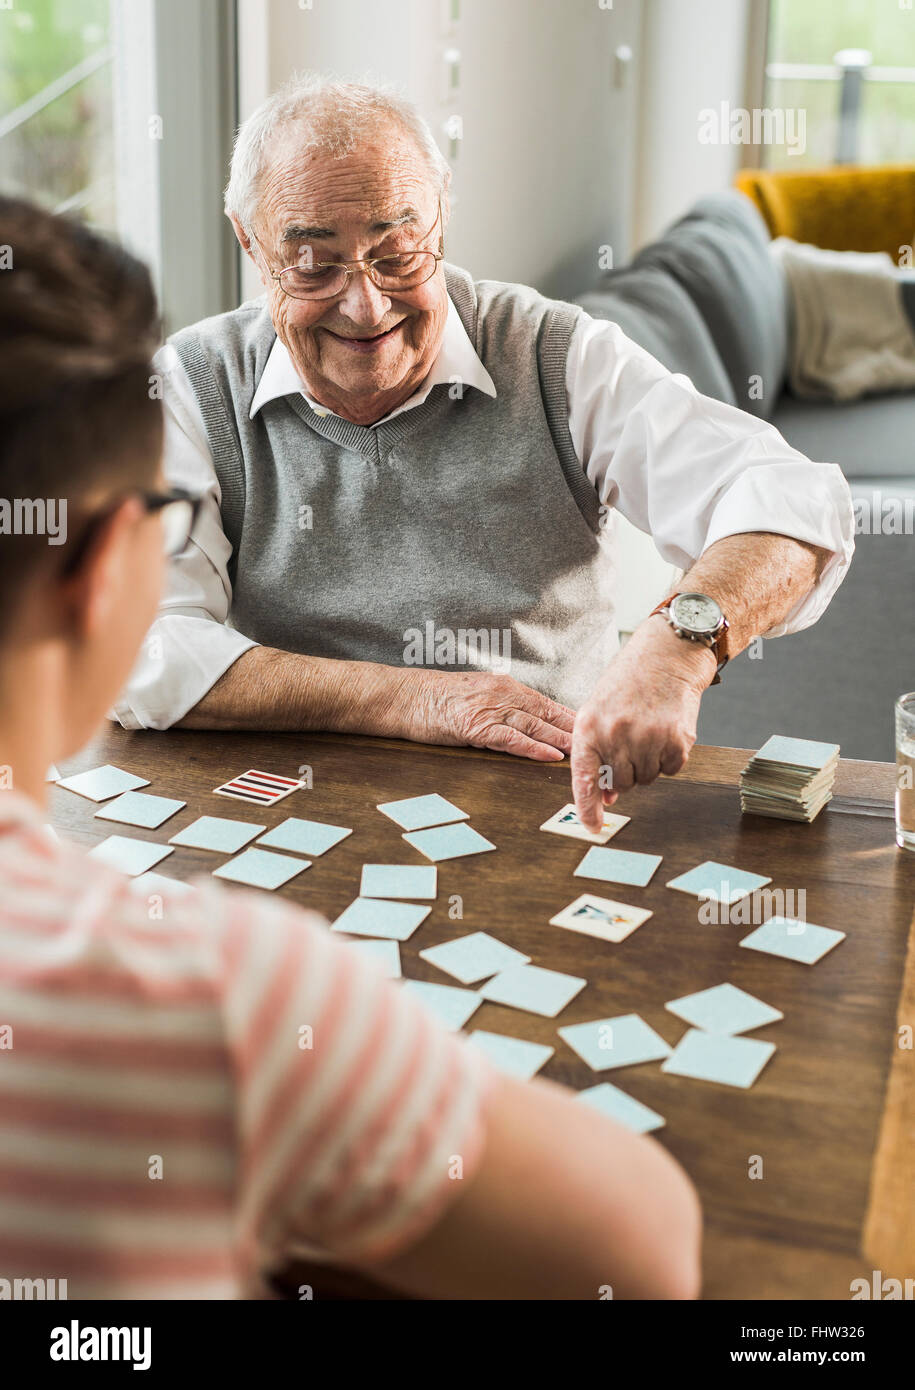 Senior man playing memory with his grandson Stock Photo